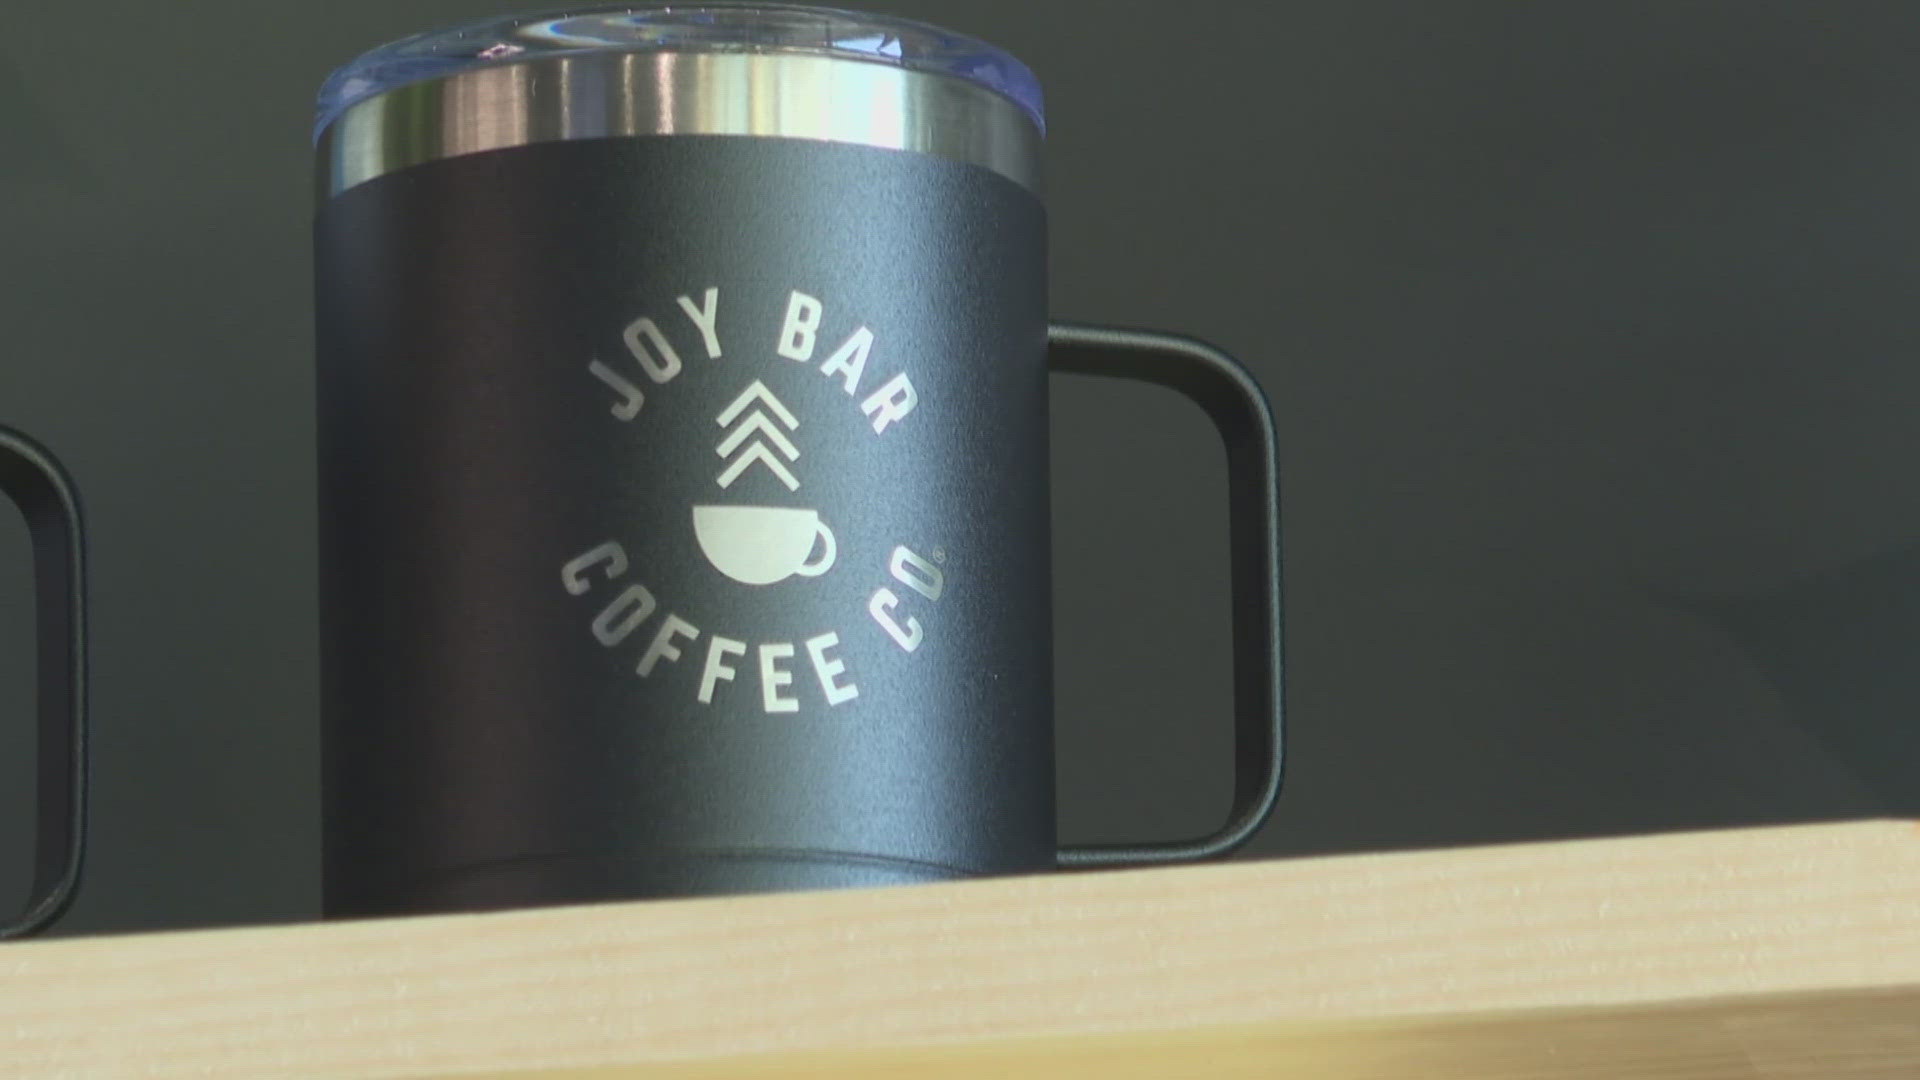 Joy Bar Coffee Co. made it its mission to hire people with disabilities.